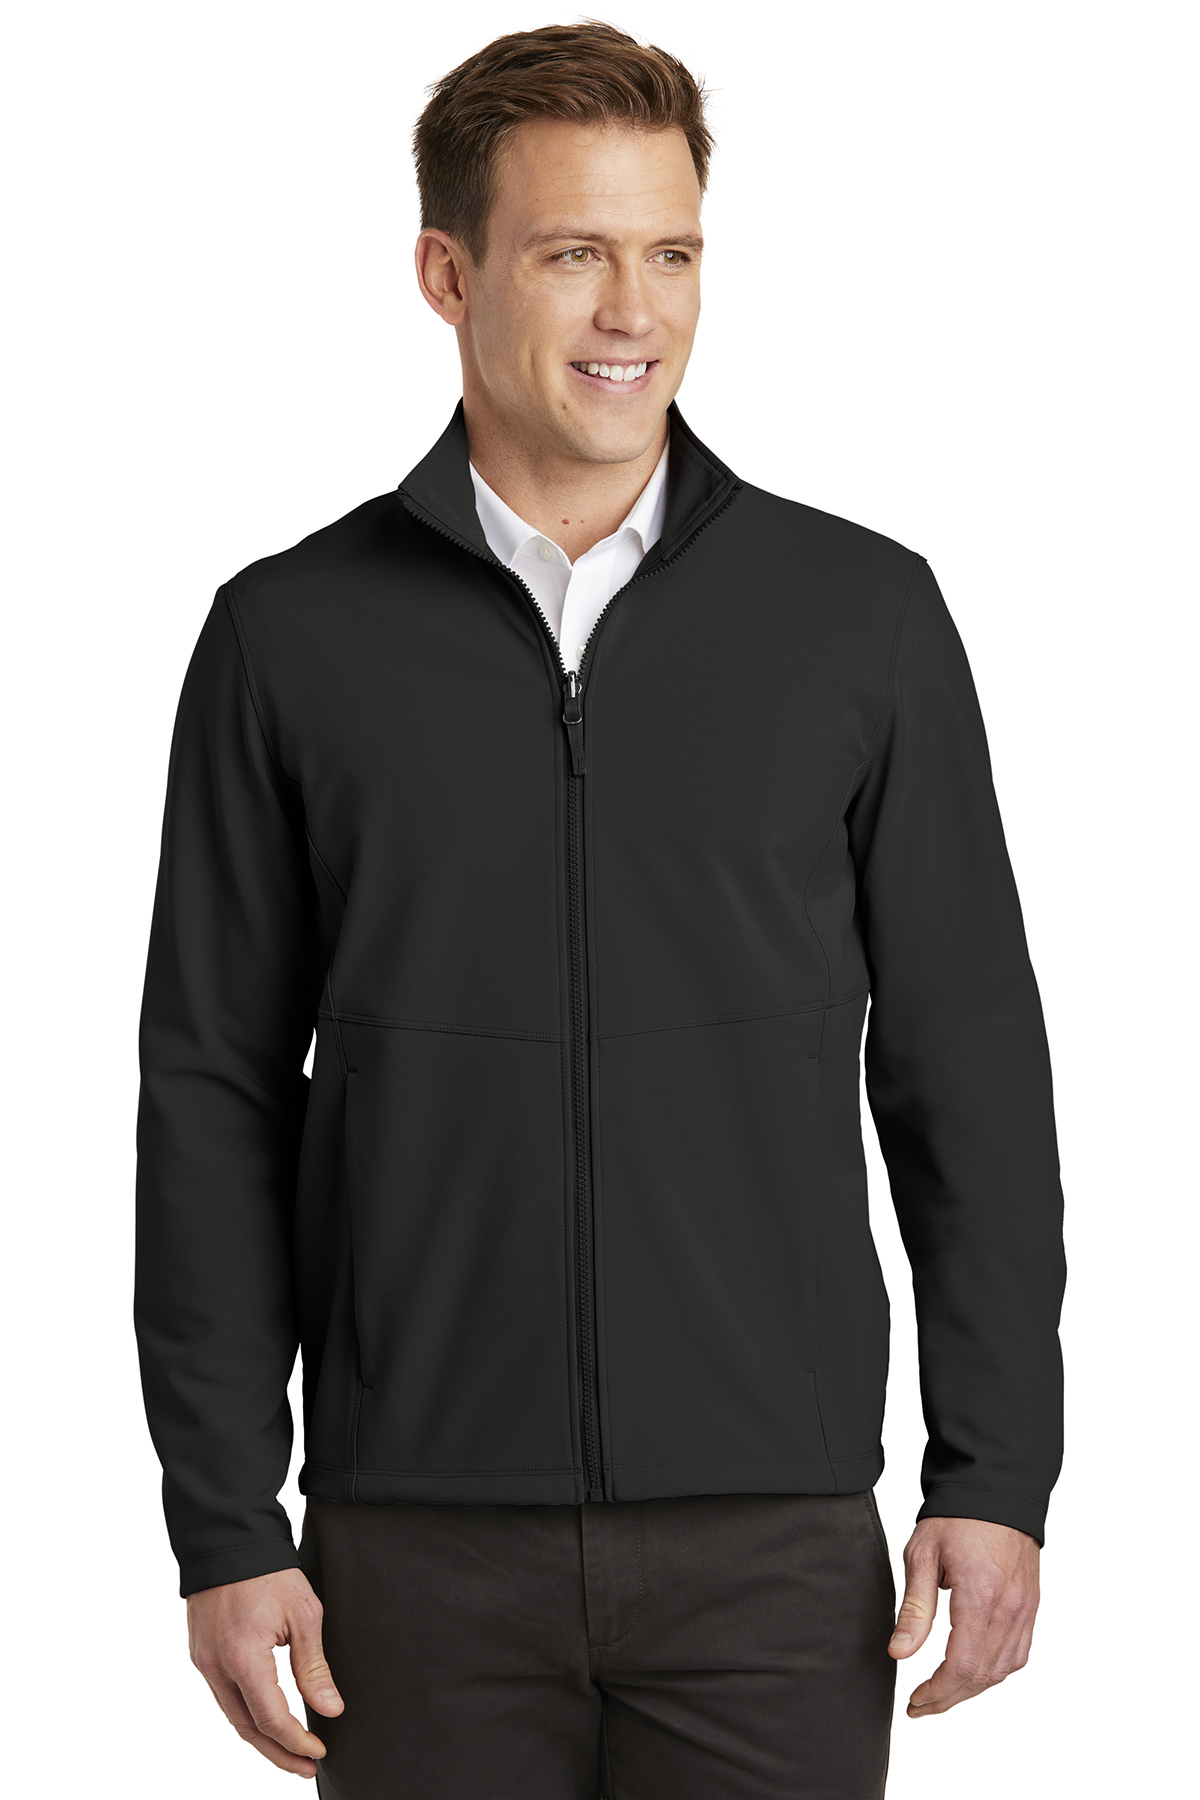 Port Authority J901 - Men's Collective Soft Shell Jacket